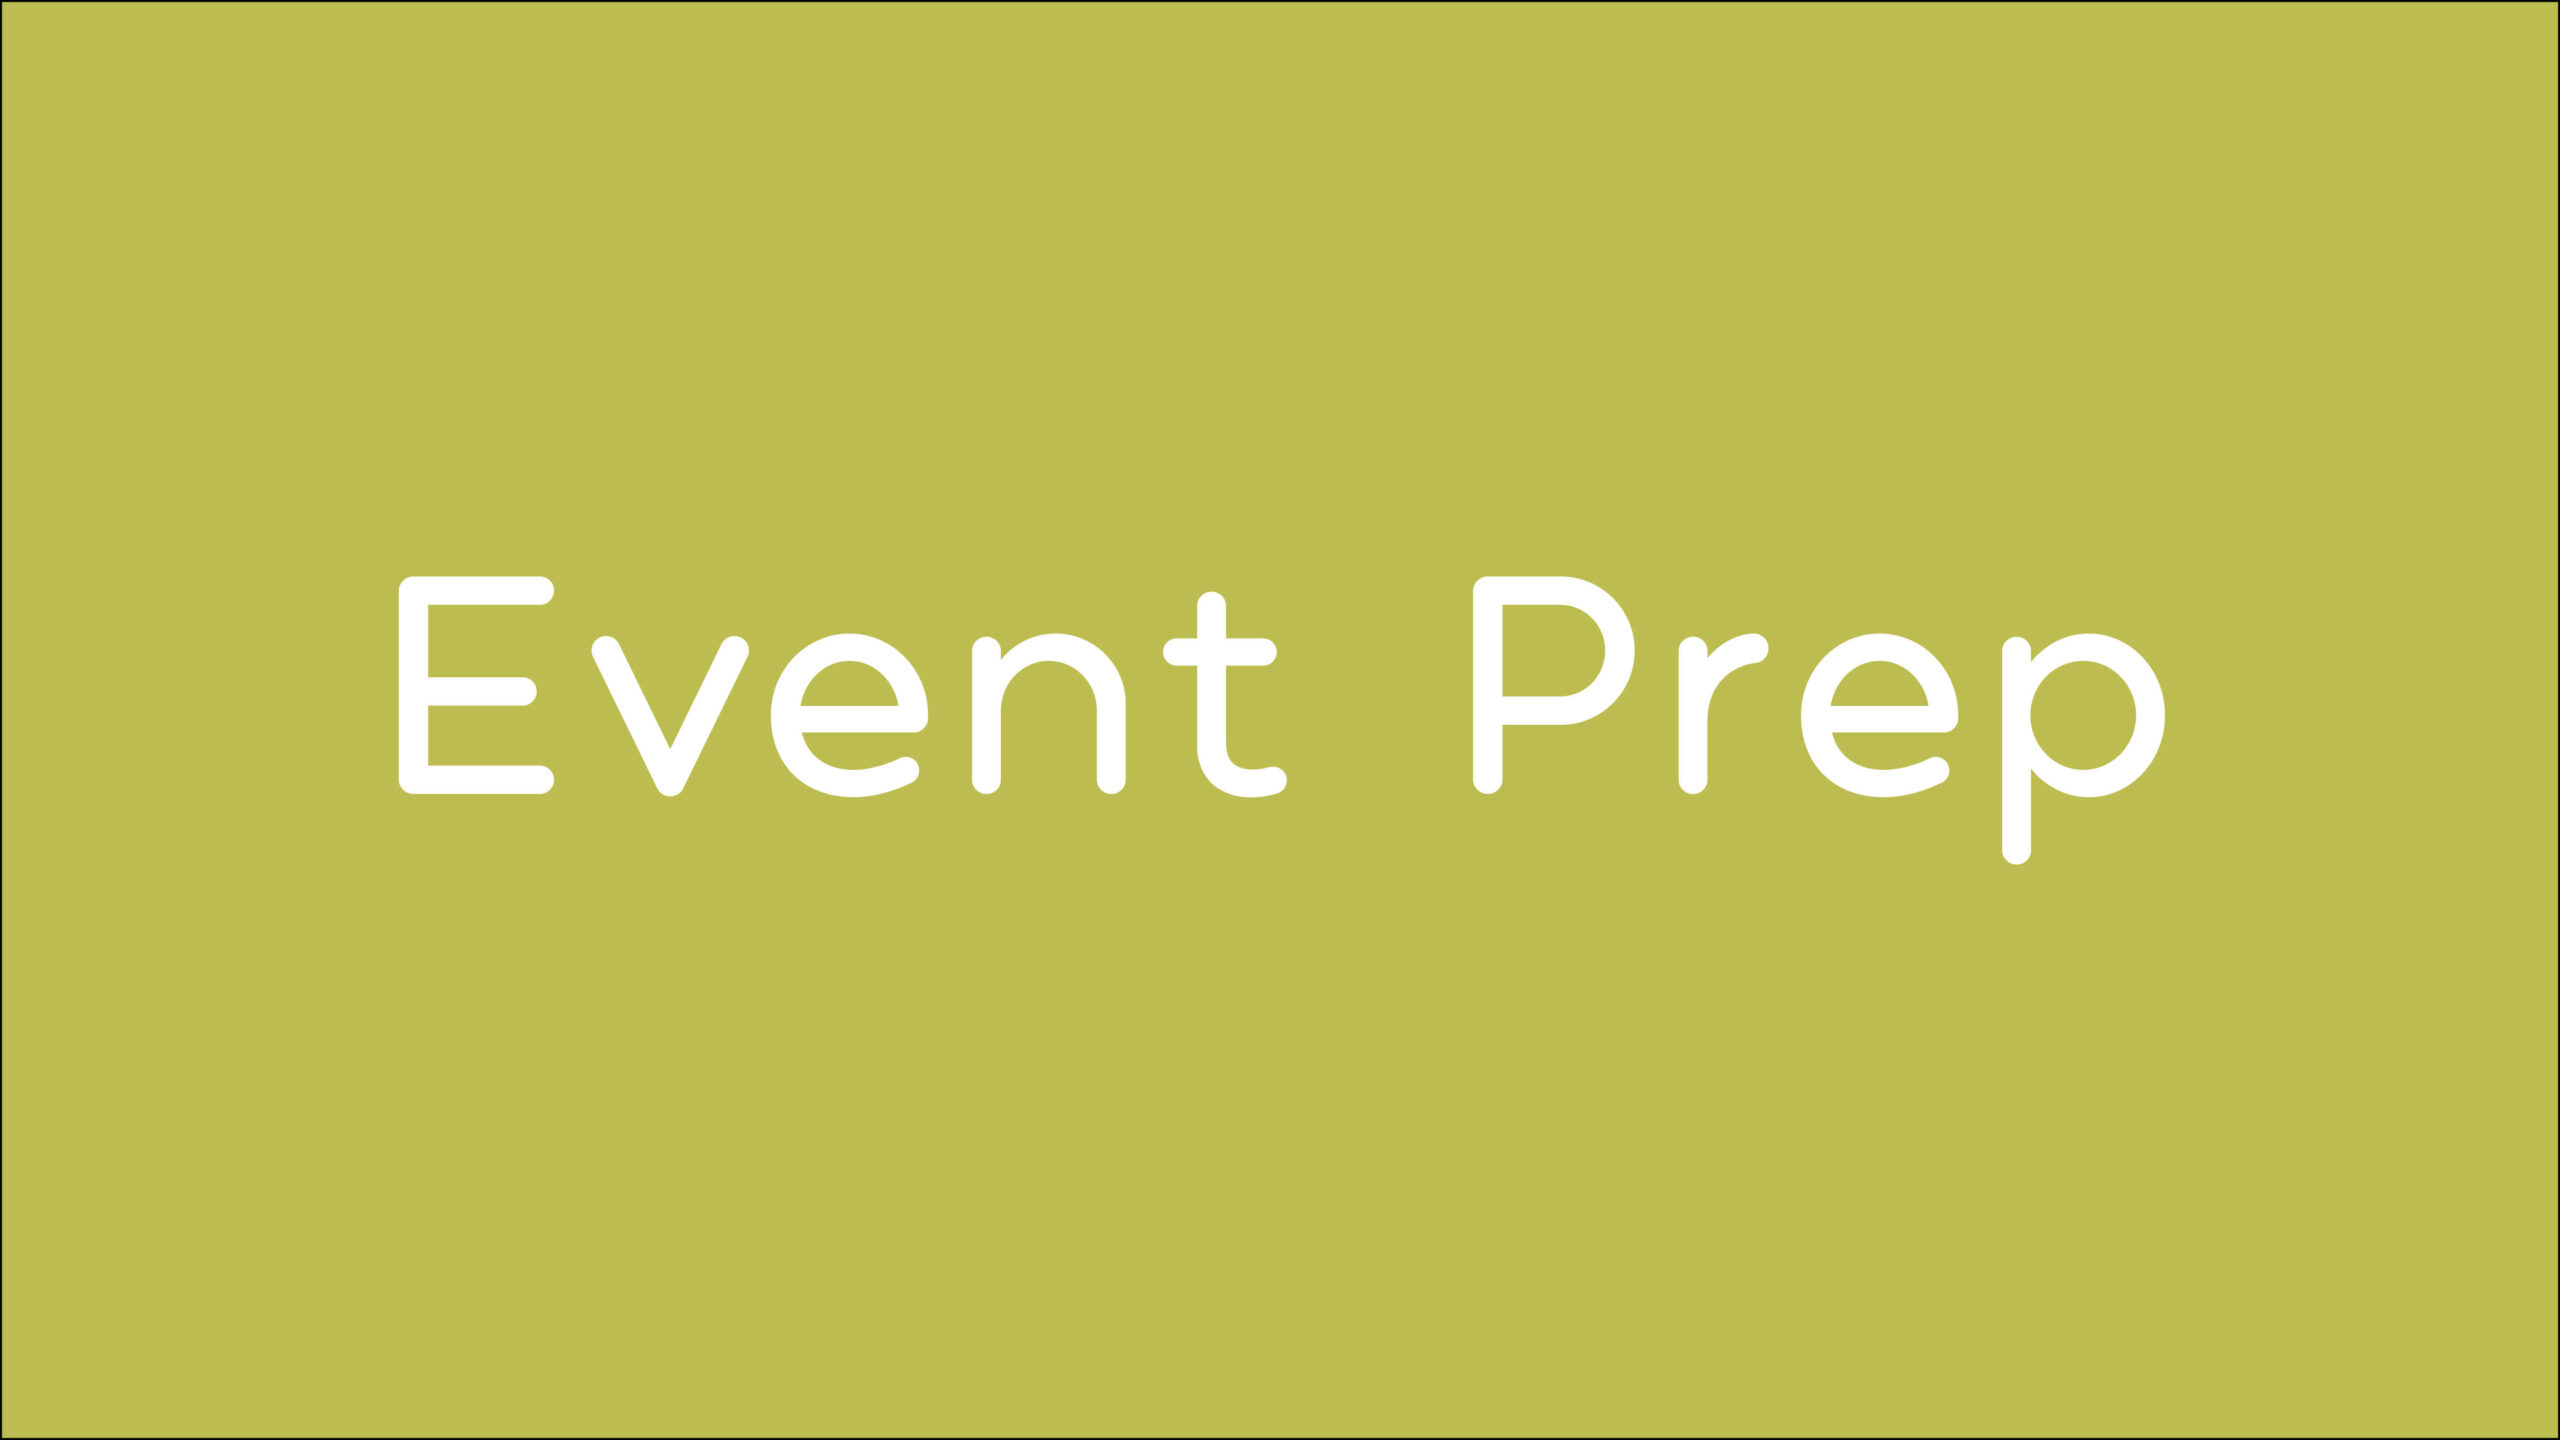 Event Prep Welcome Kit Graphic